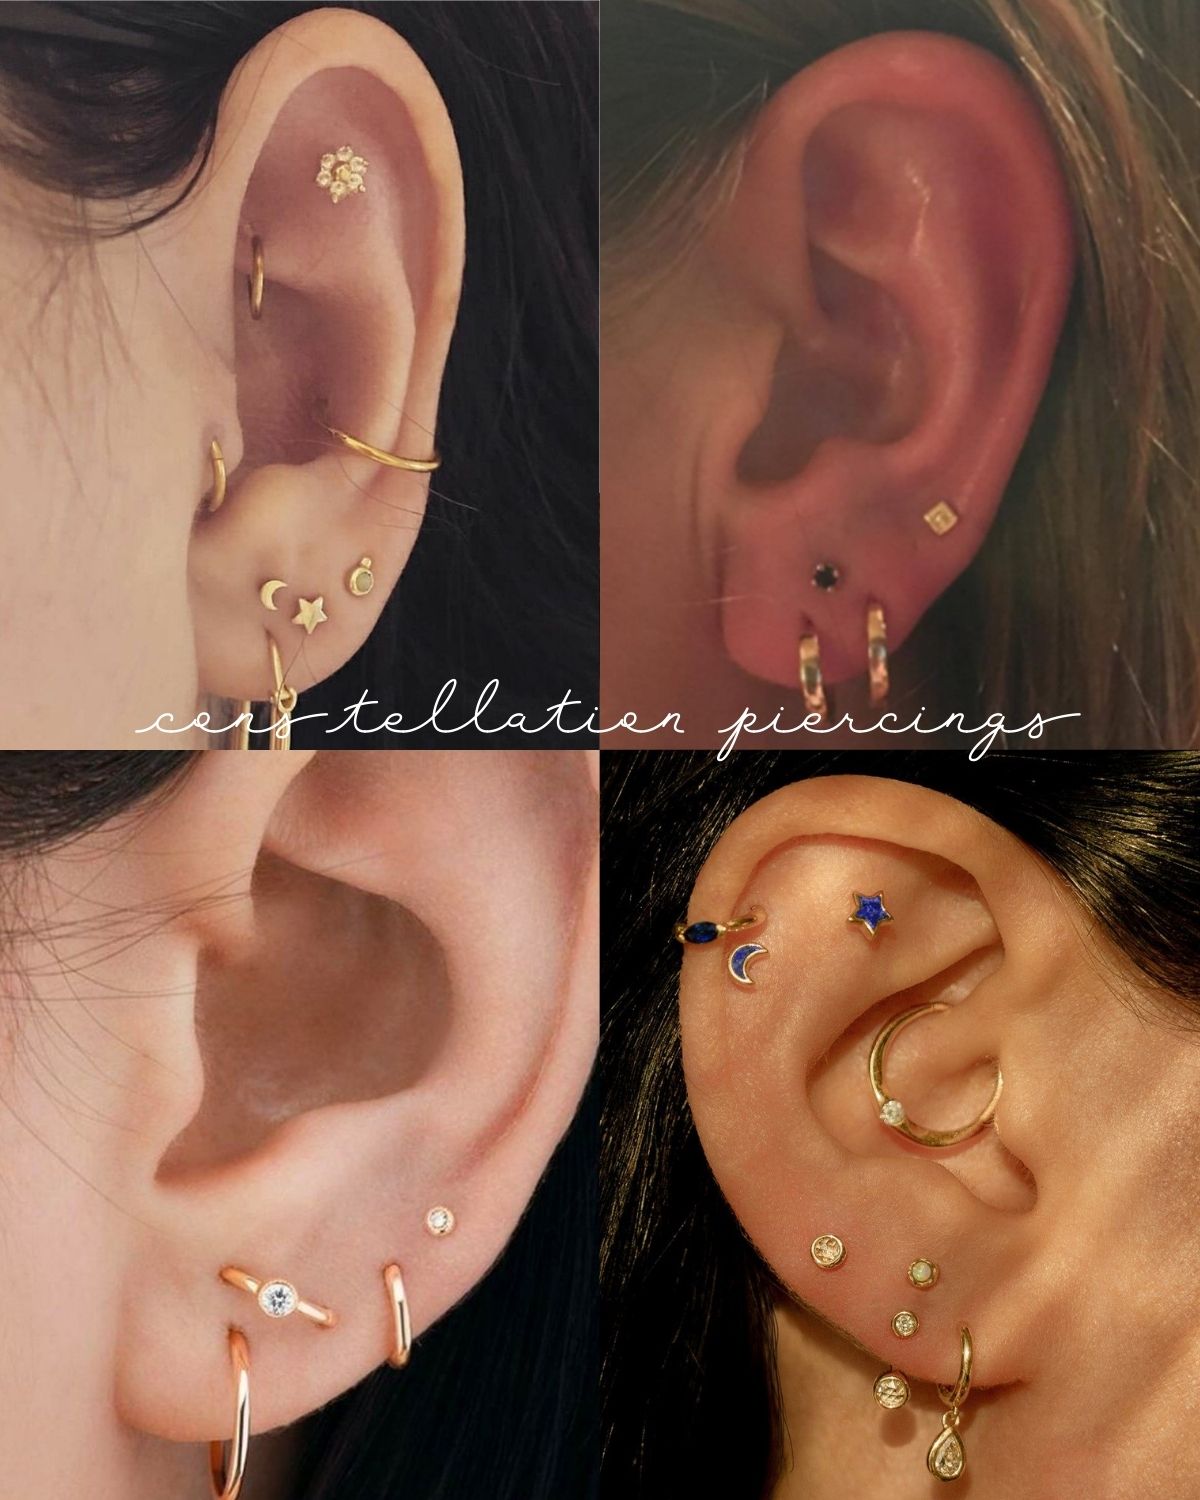 Four women with clusters of piercings on their lobes